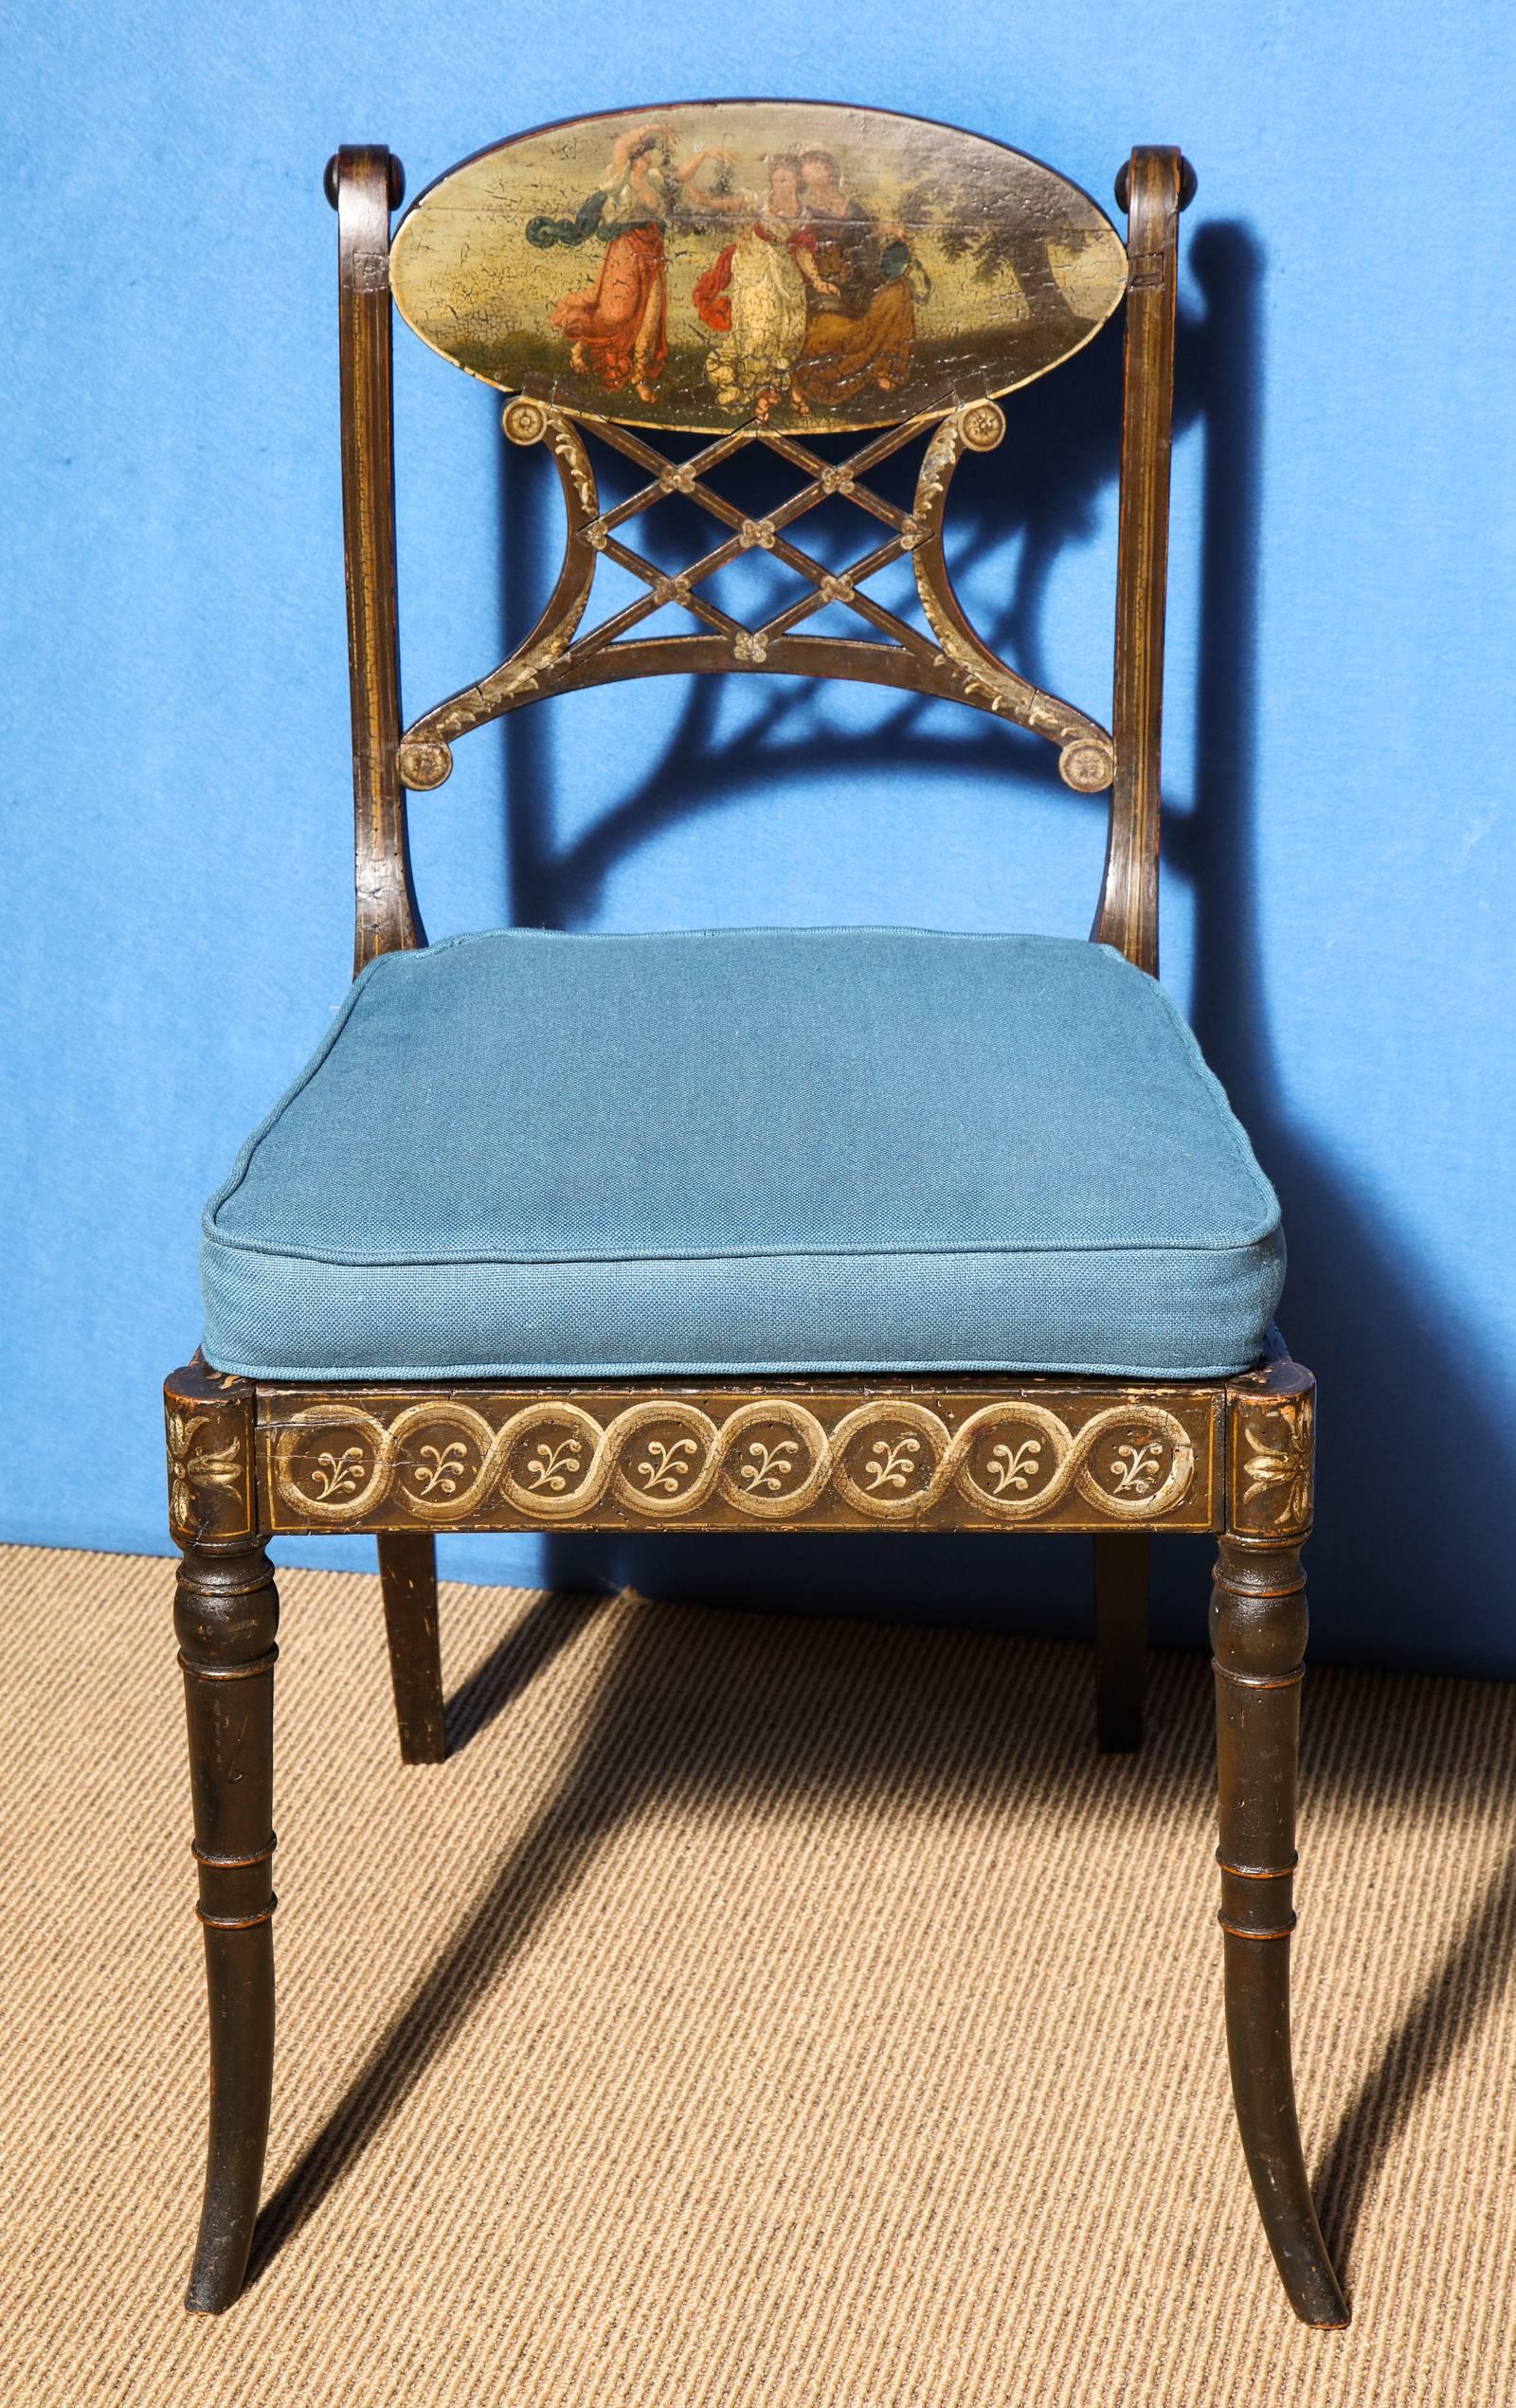 Sheraton Polychrome Faux Rosewood  Side Chairs, English, circa 1795 For Sale 3